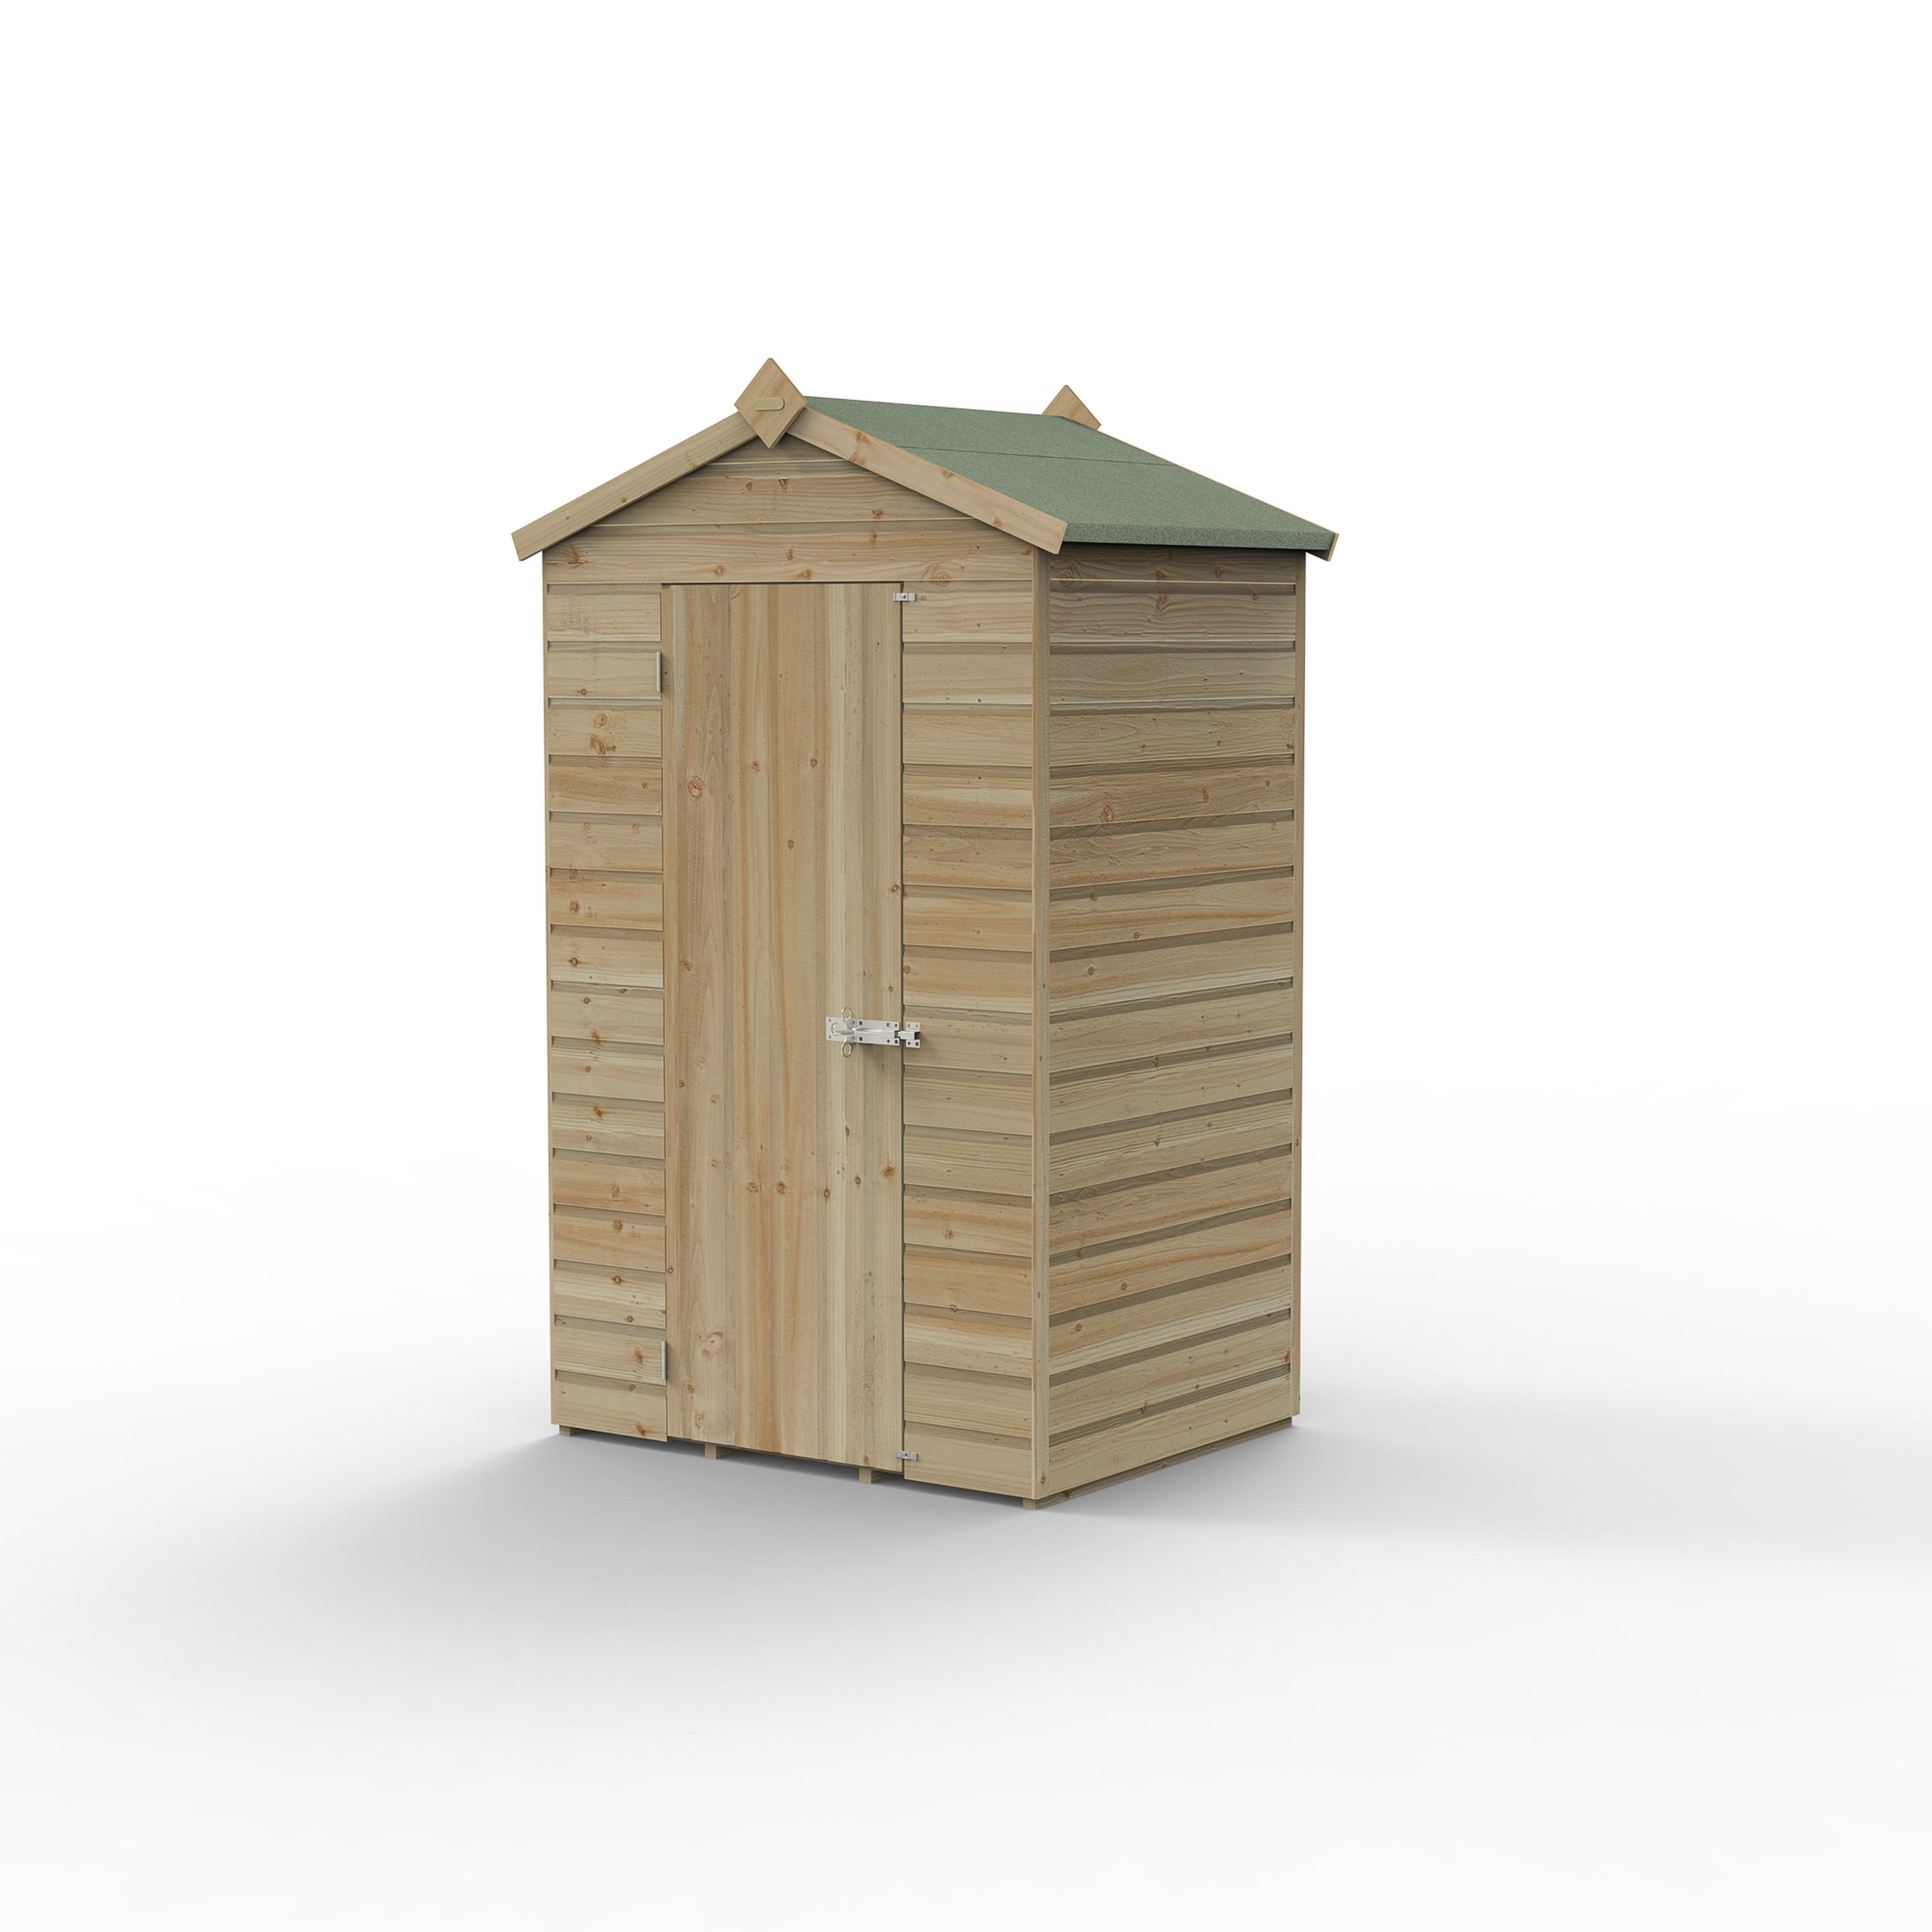 Forest Garden Beckwood 4x3 ft Apex Natural timber Wooden Shed with floor (Base included)